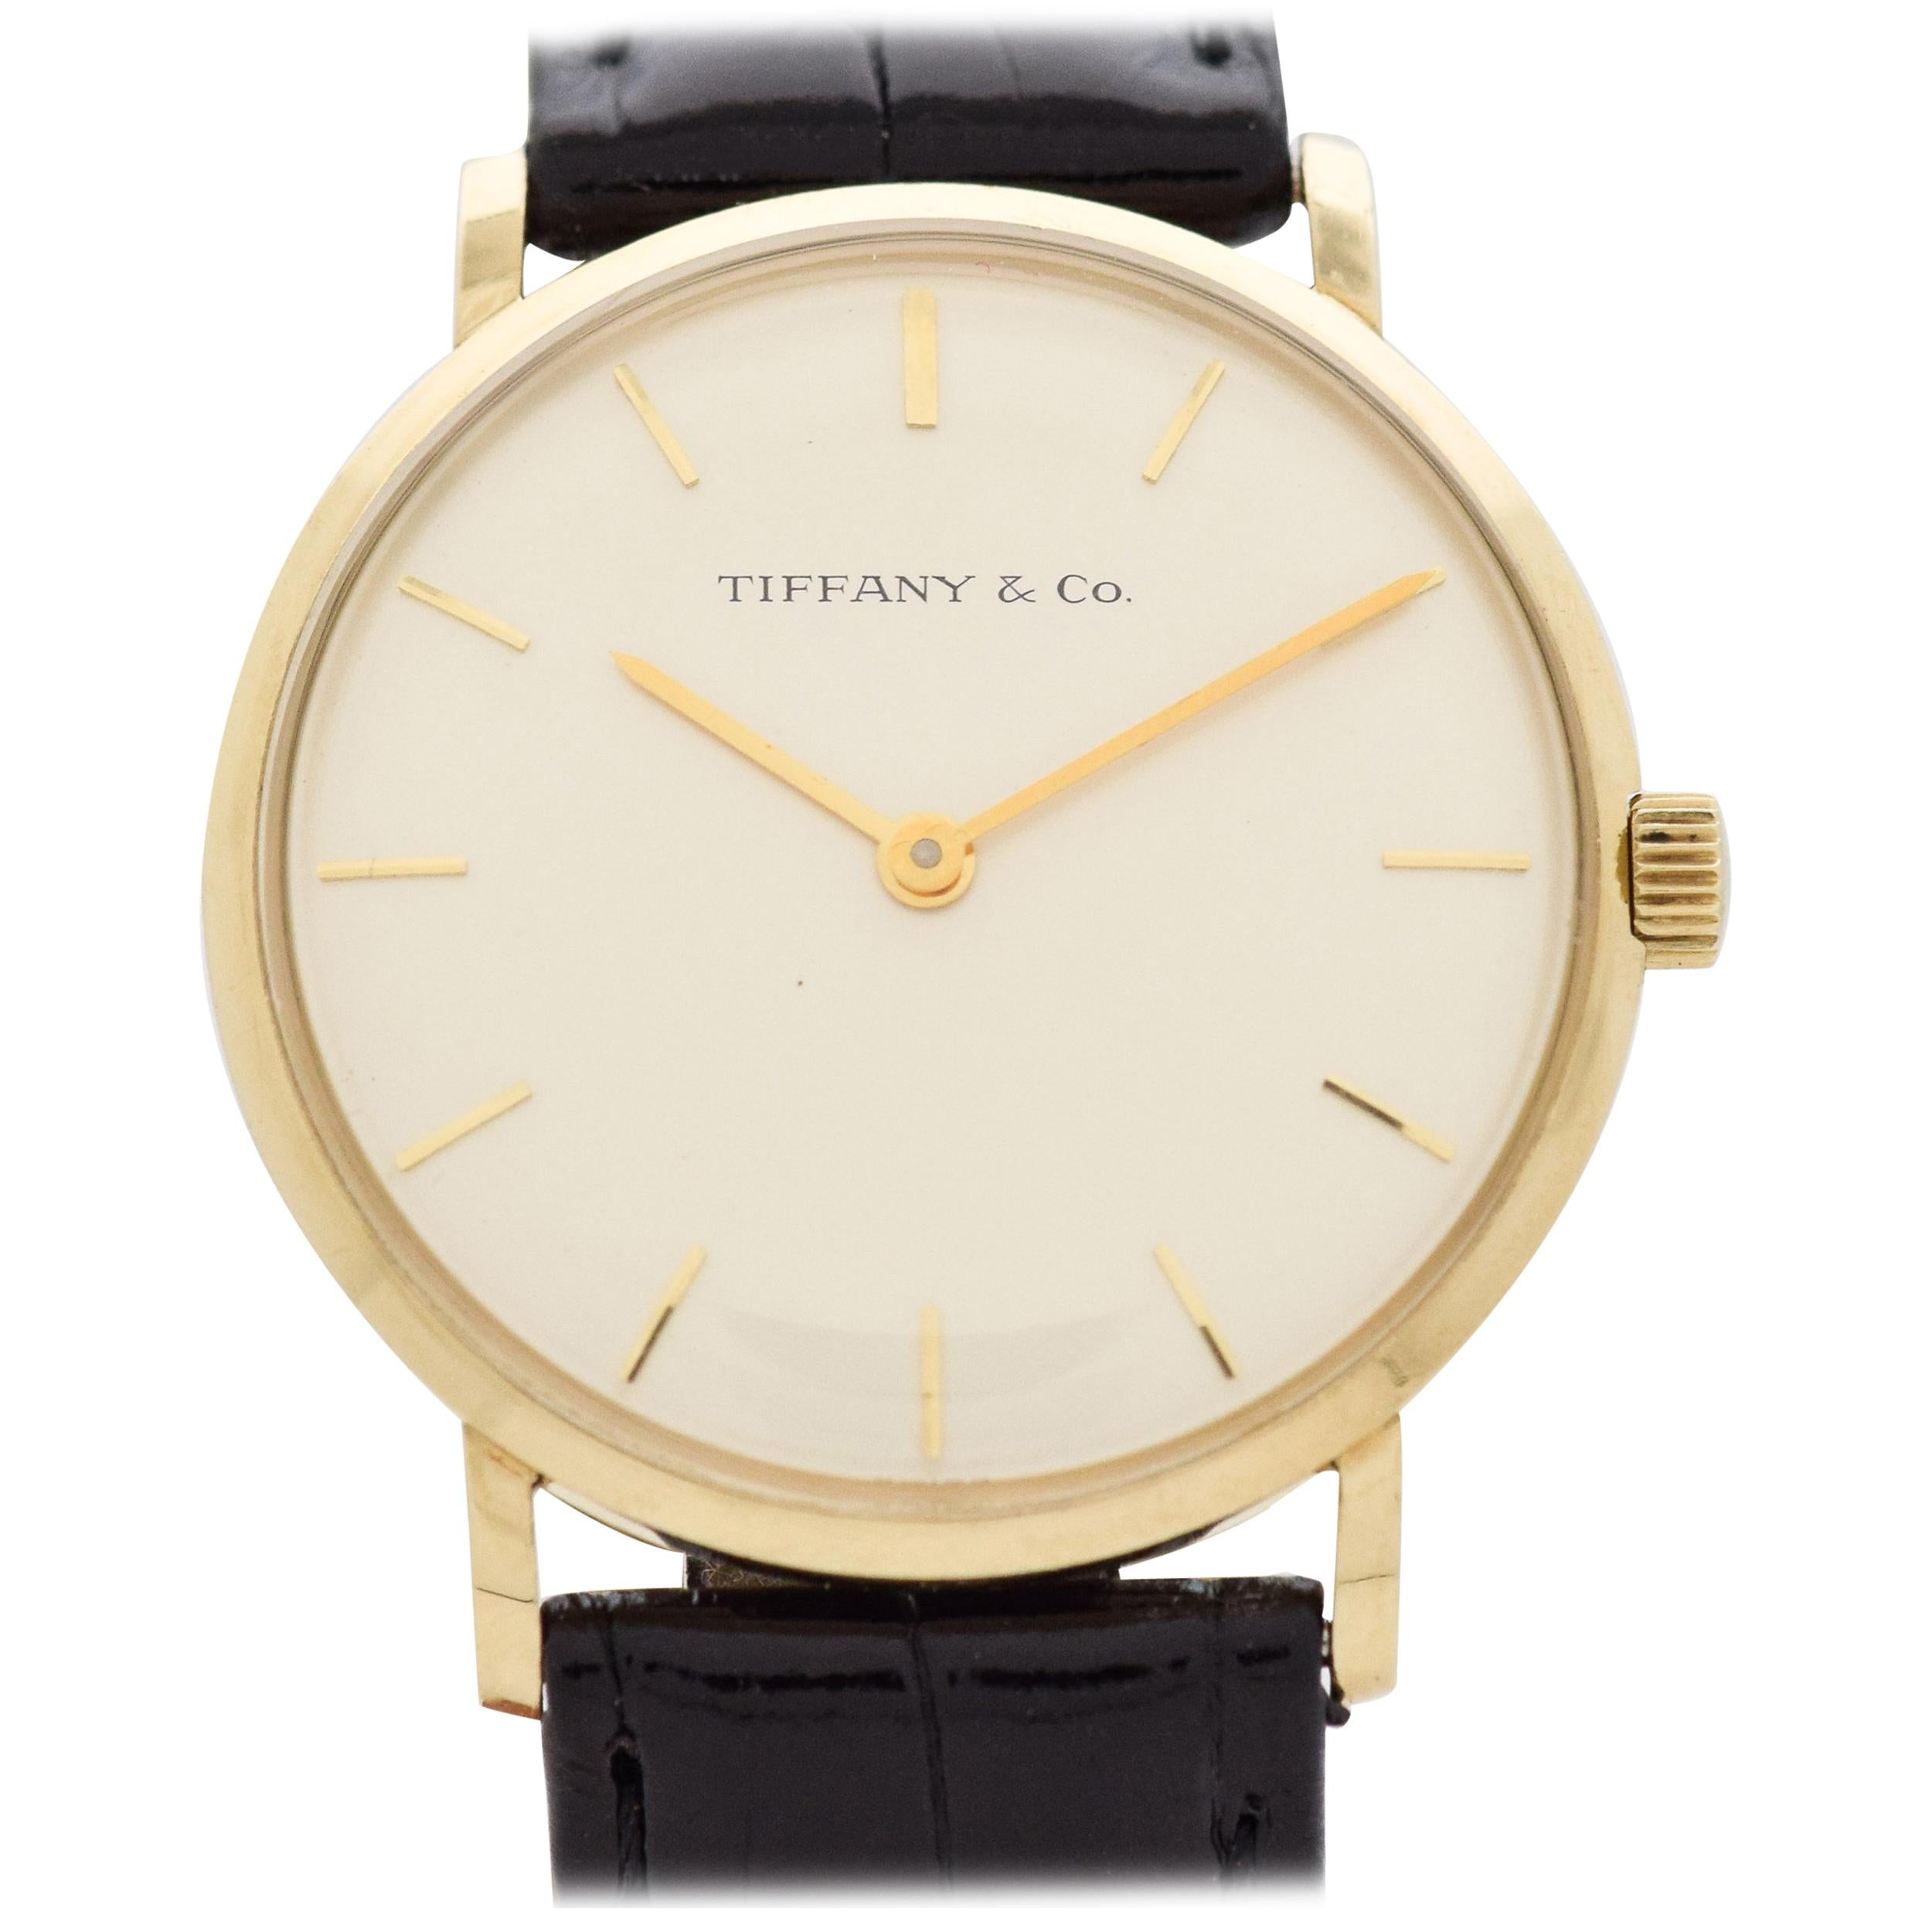 Vintage Tiffany & Co. Service Watch in 14 Karat Yellow Gold, 1969 For Sale